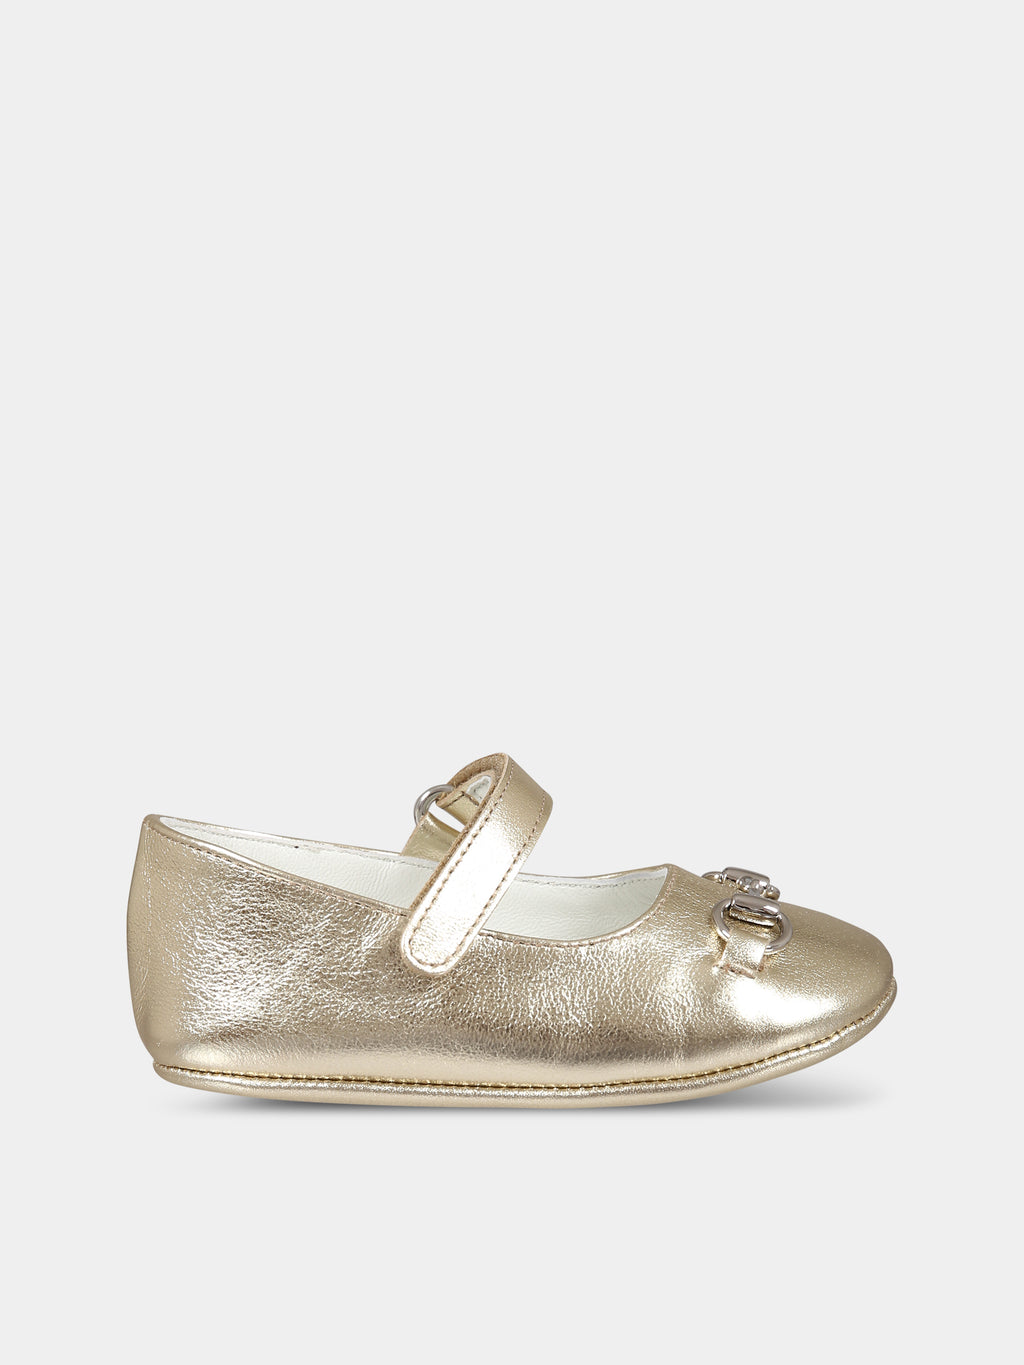 Gold ballet flats for baby girl with horsebit